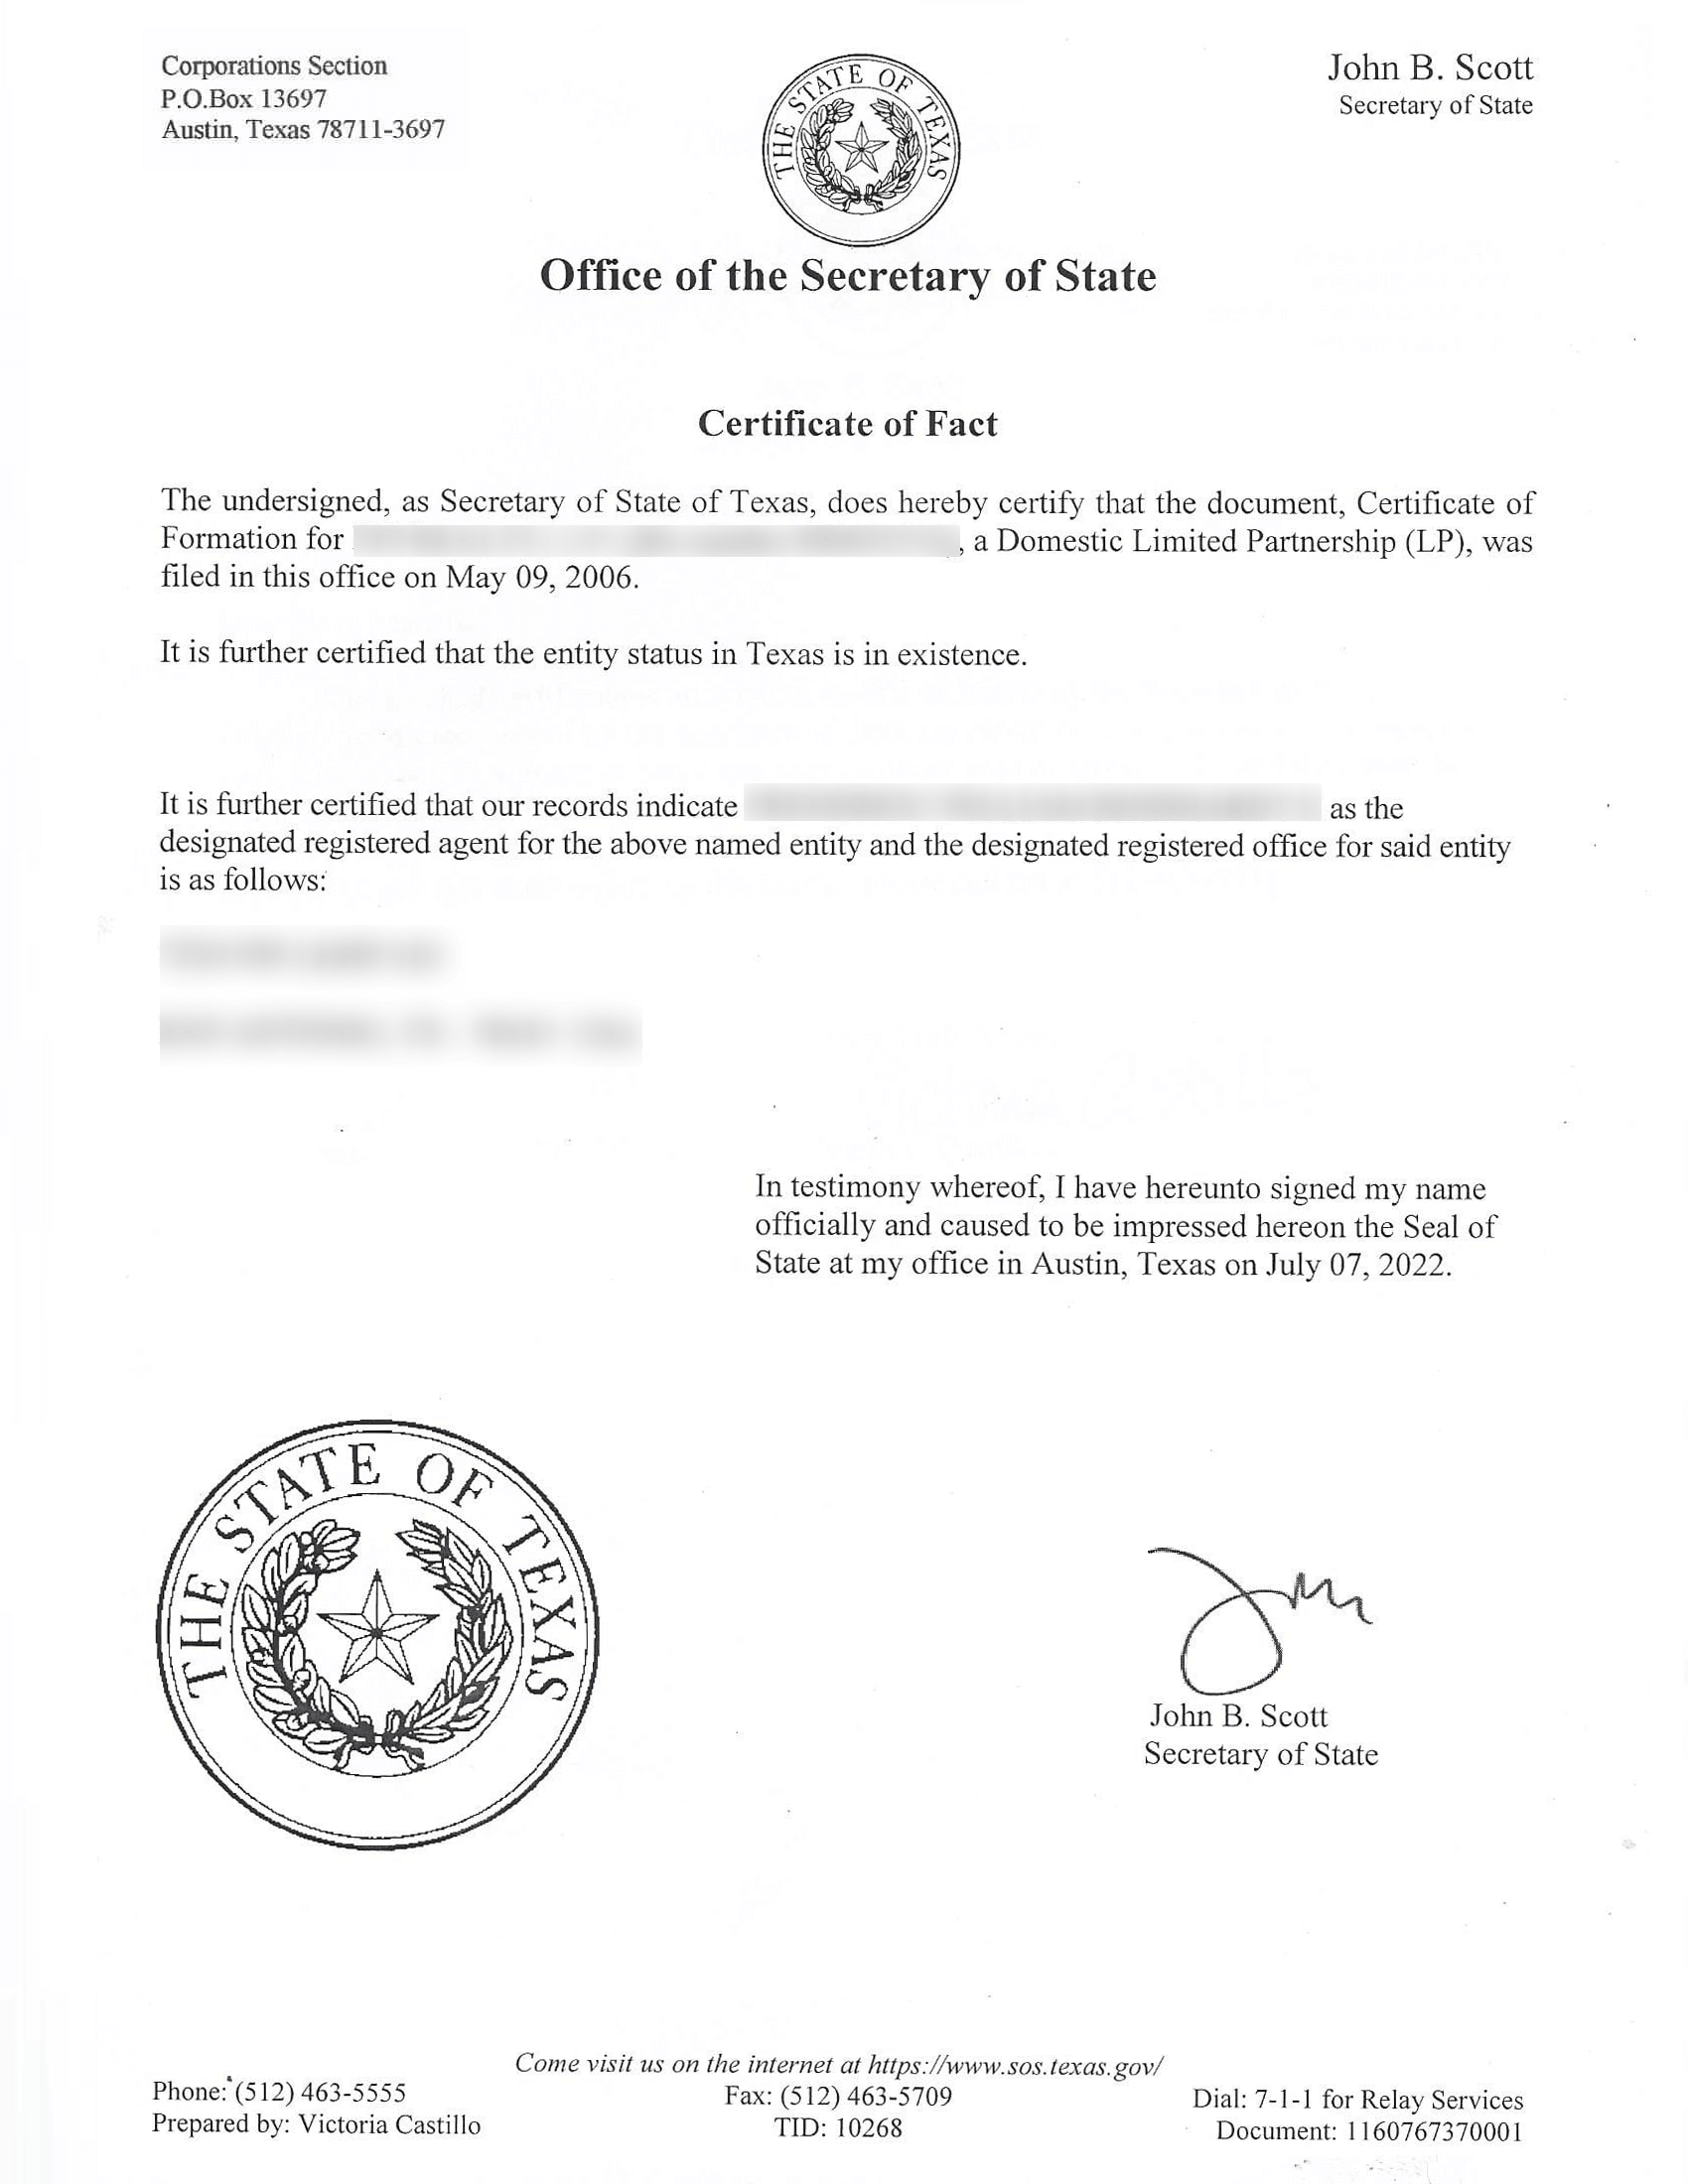 Texas Certificate Of Fact With Registered Agent/Office